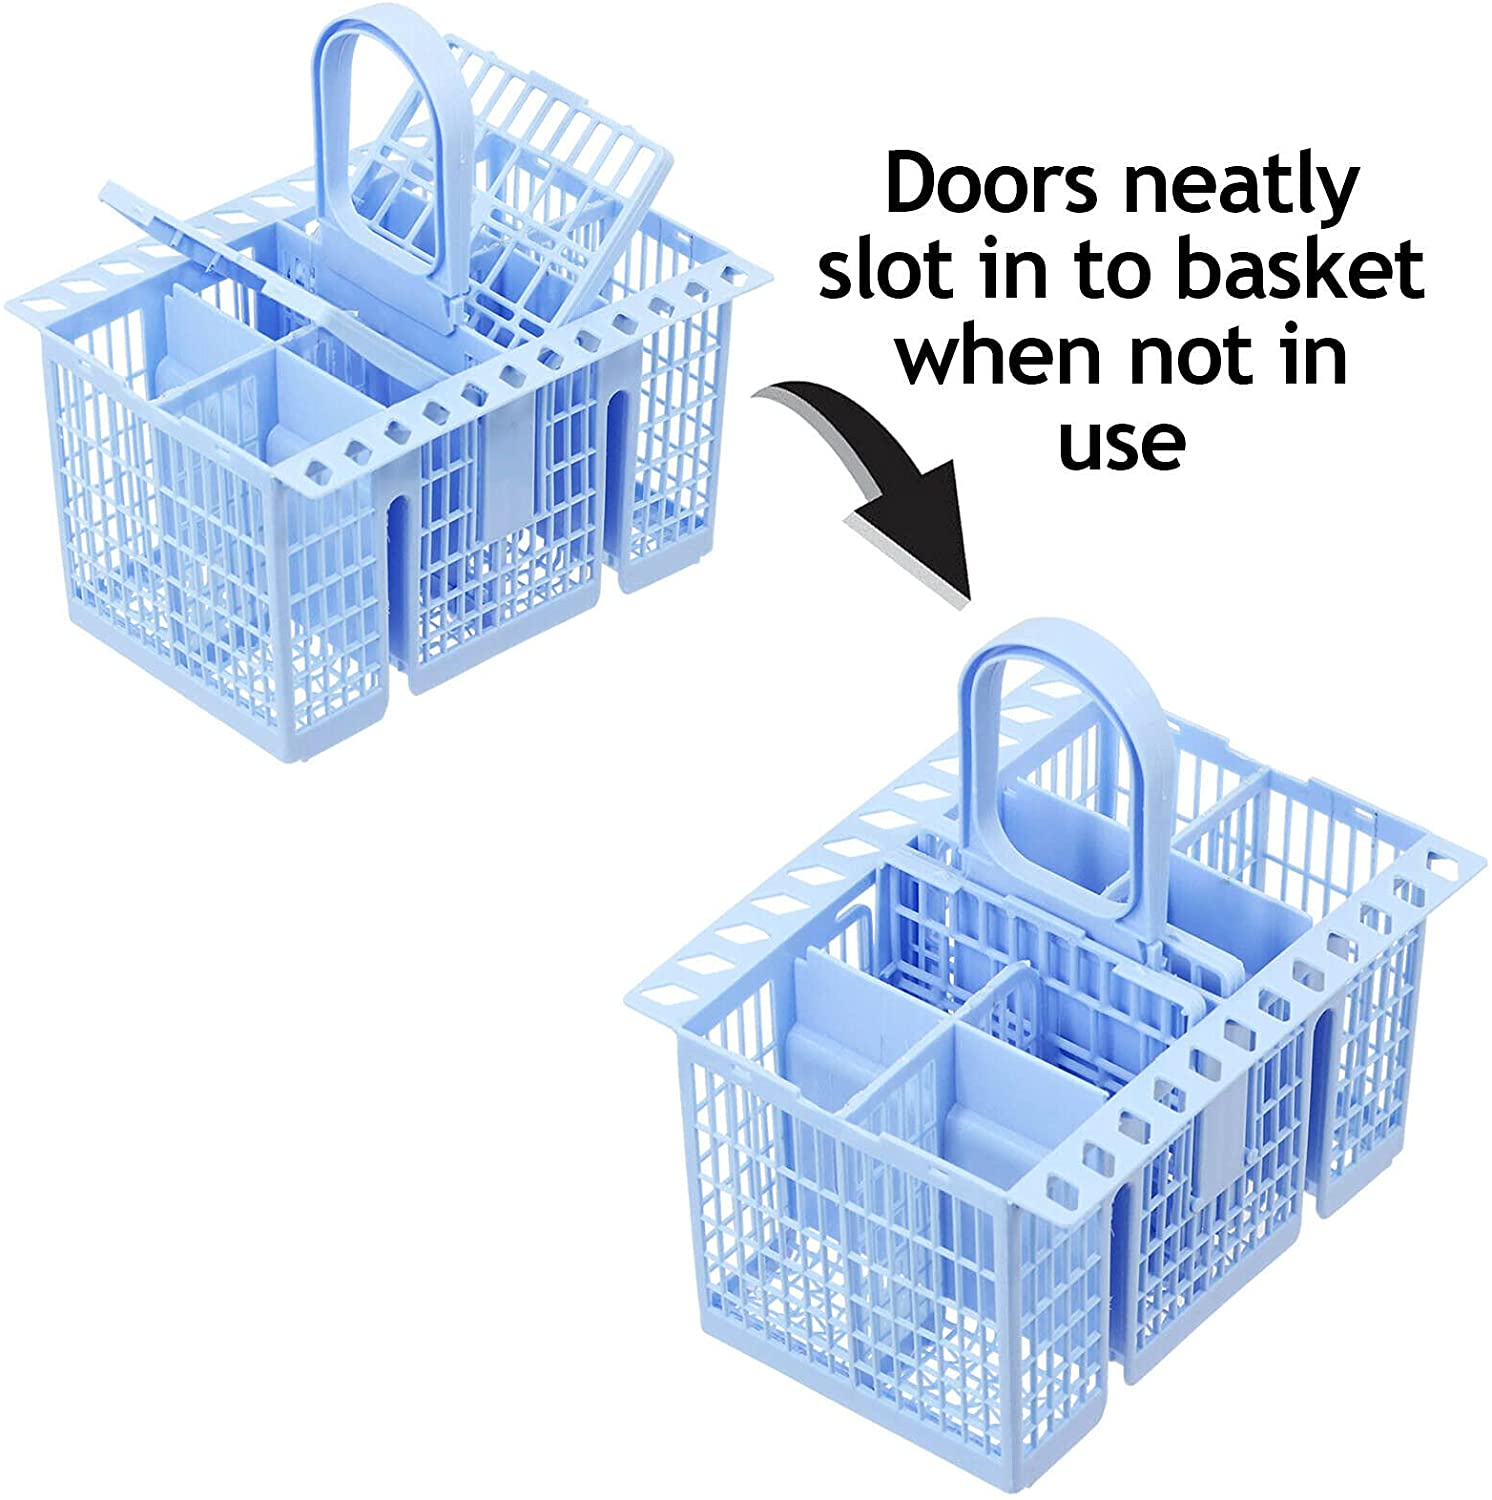 SPARES2GO Cutlery Basket compatible with Amica Dishwasher (Blue, 220 x 208 x 160mm)